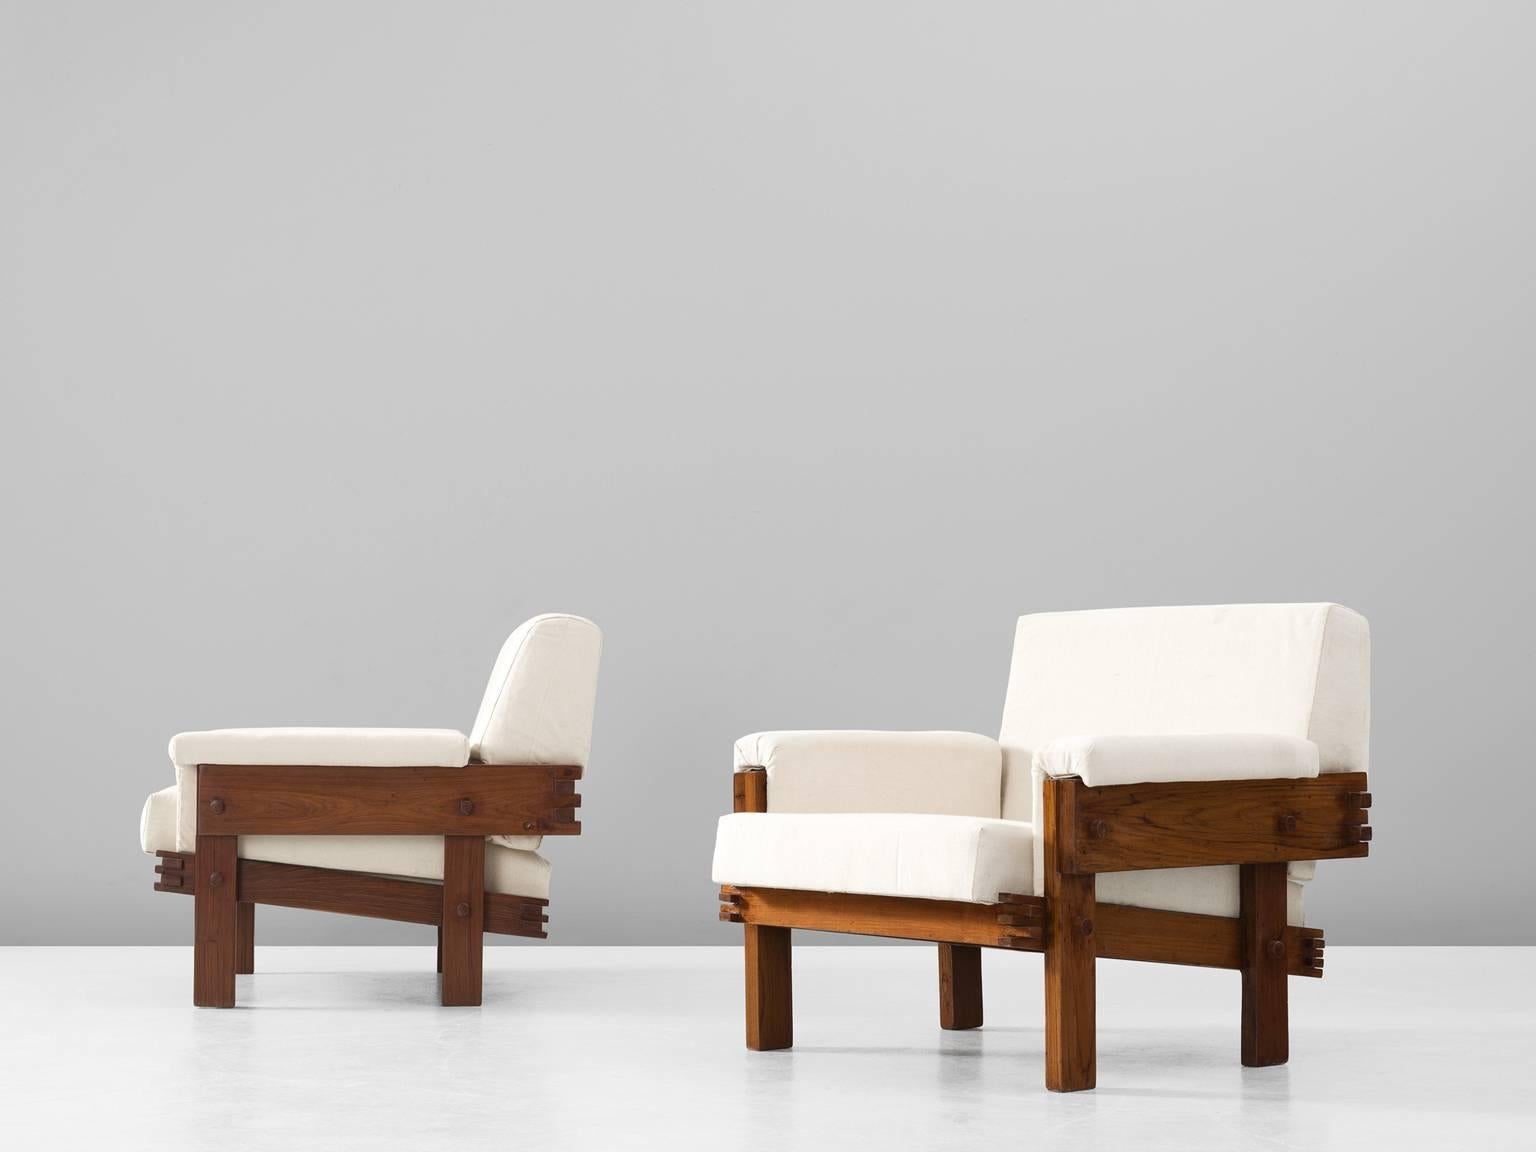 Pair of lounge chairs, in teak and fabric, Brazil, 1960s. 

Beautiful pair of cubic easy chairs in dark stained teak with off-white fabric upholstery. These chairs have a sturdy design, in which the wood-joints and structure of the wood are the